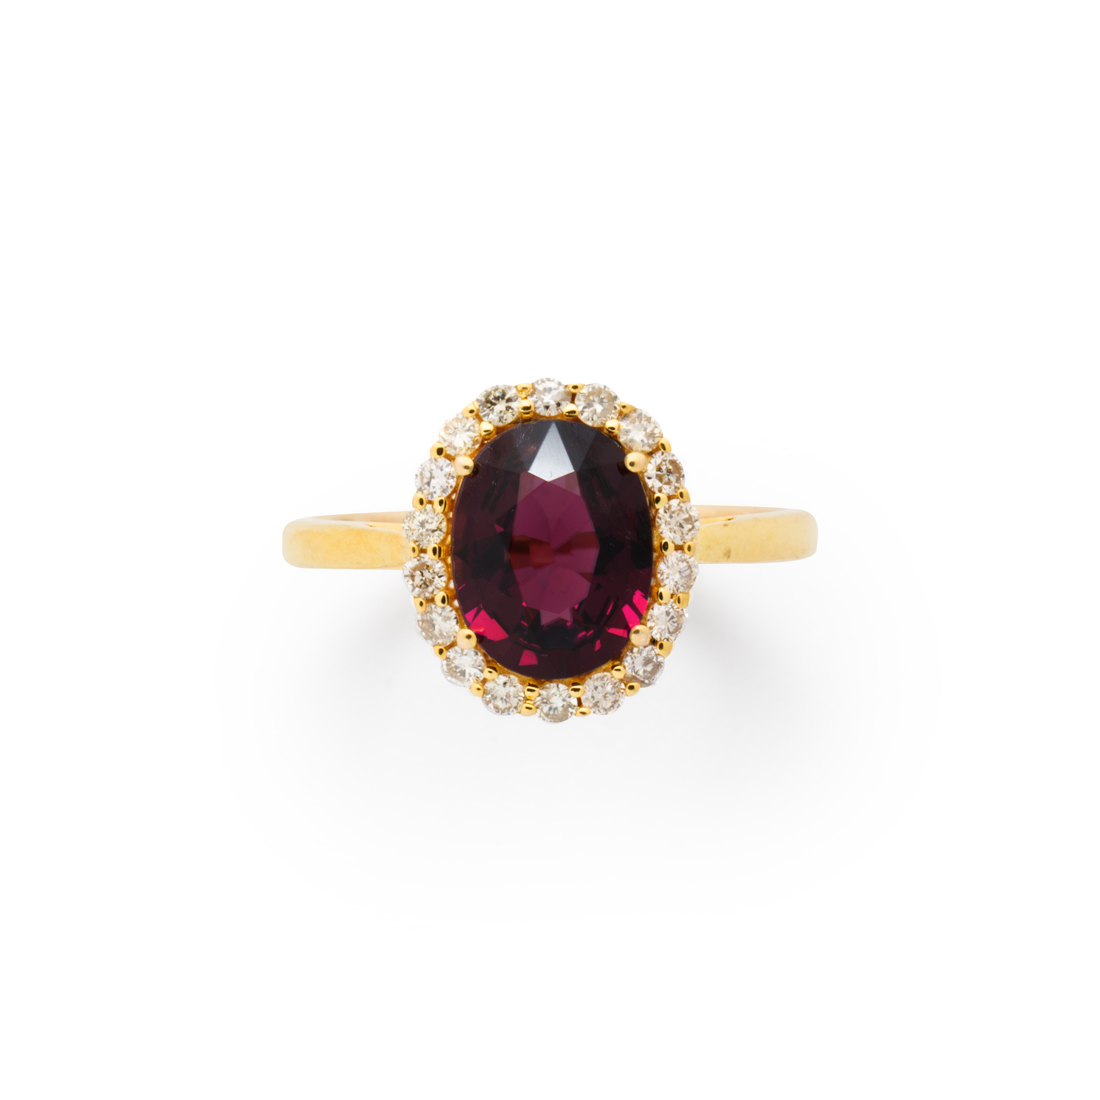 A RED SPINEL DIAMOND AND EIGHTEEN 3a2839